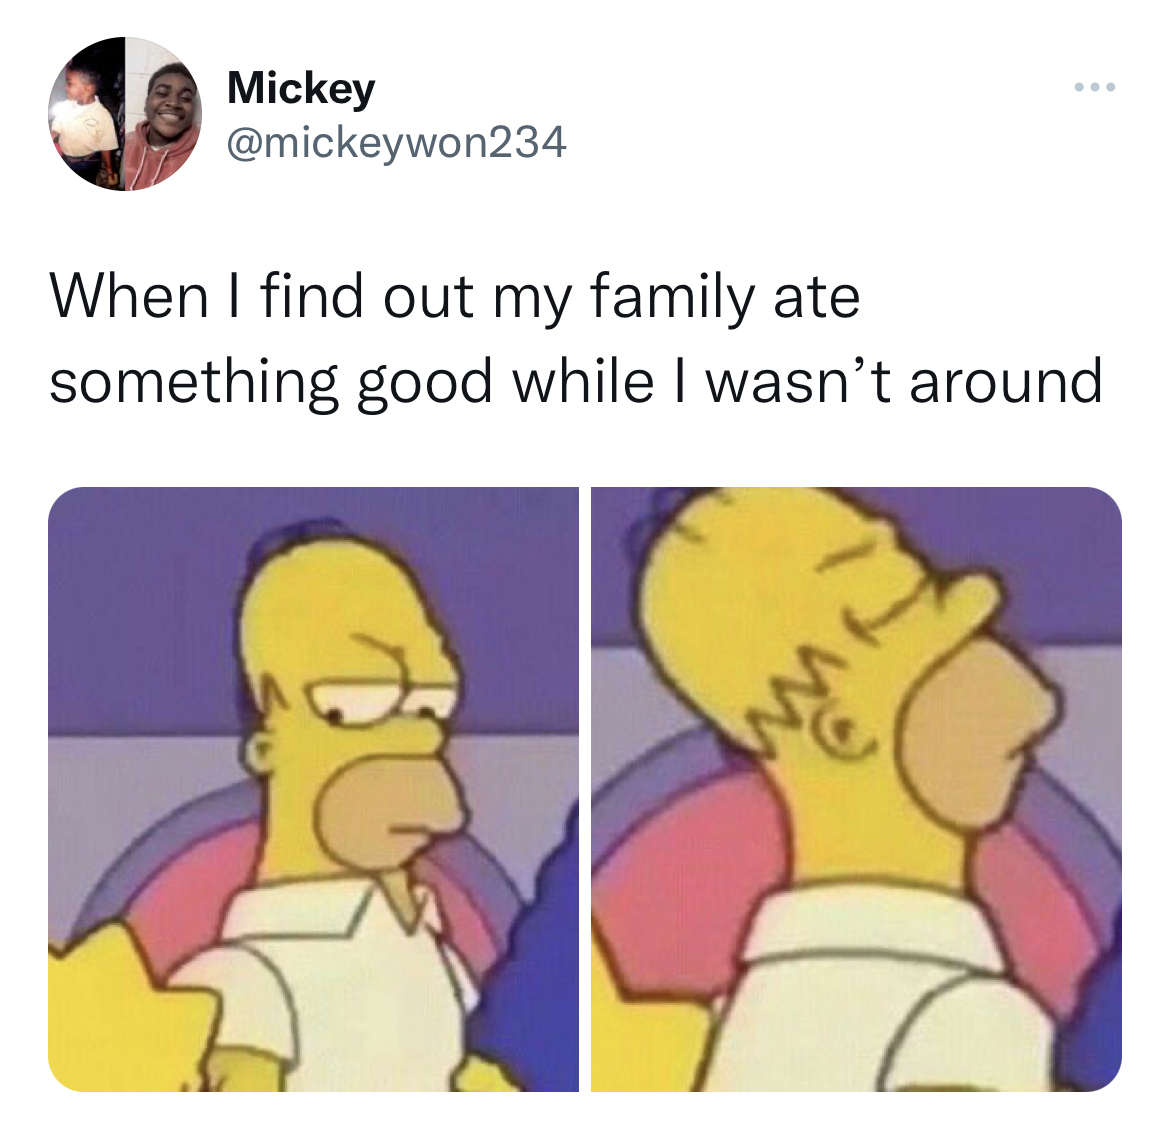 Savage and funny tweets - cartoon - Mickey ... When I find out my family ate something good while I wasn't around m